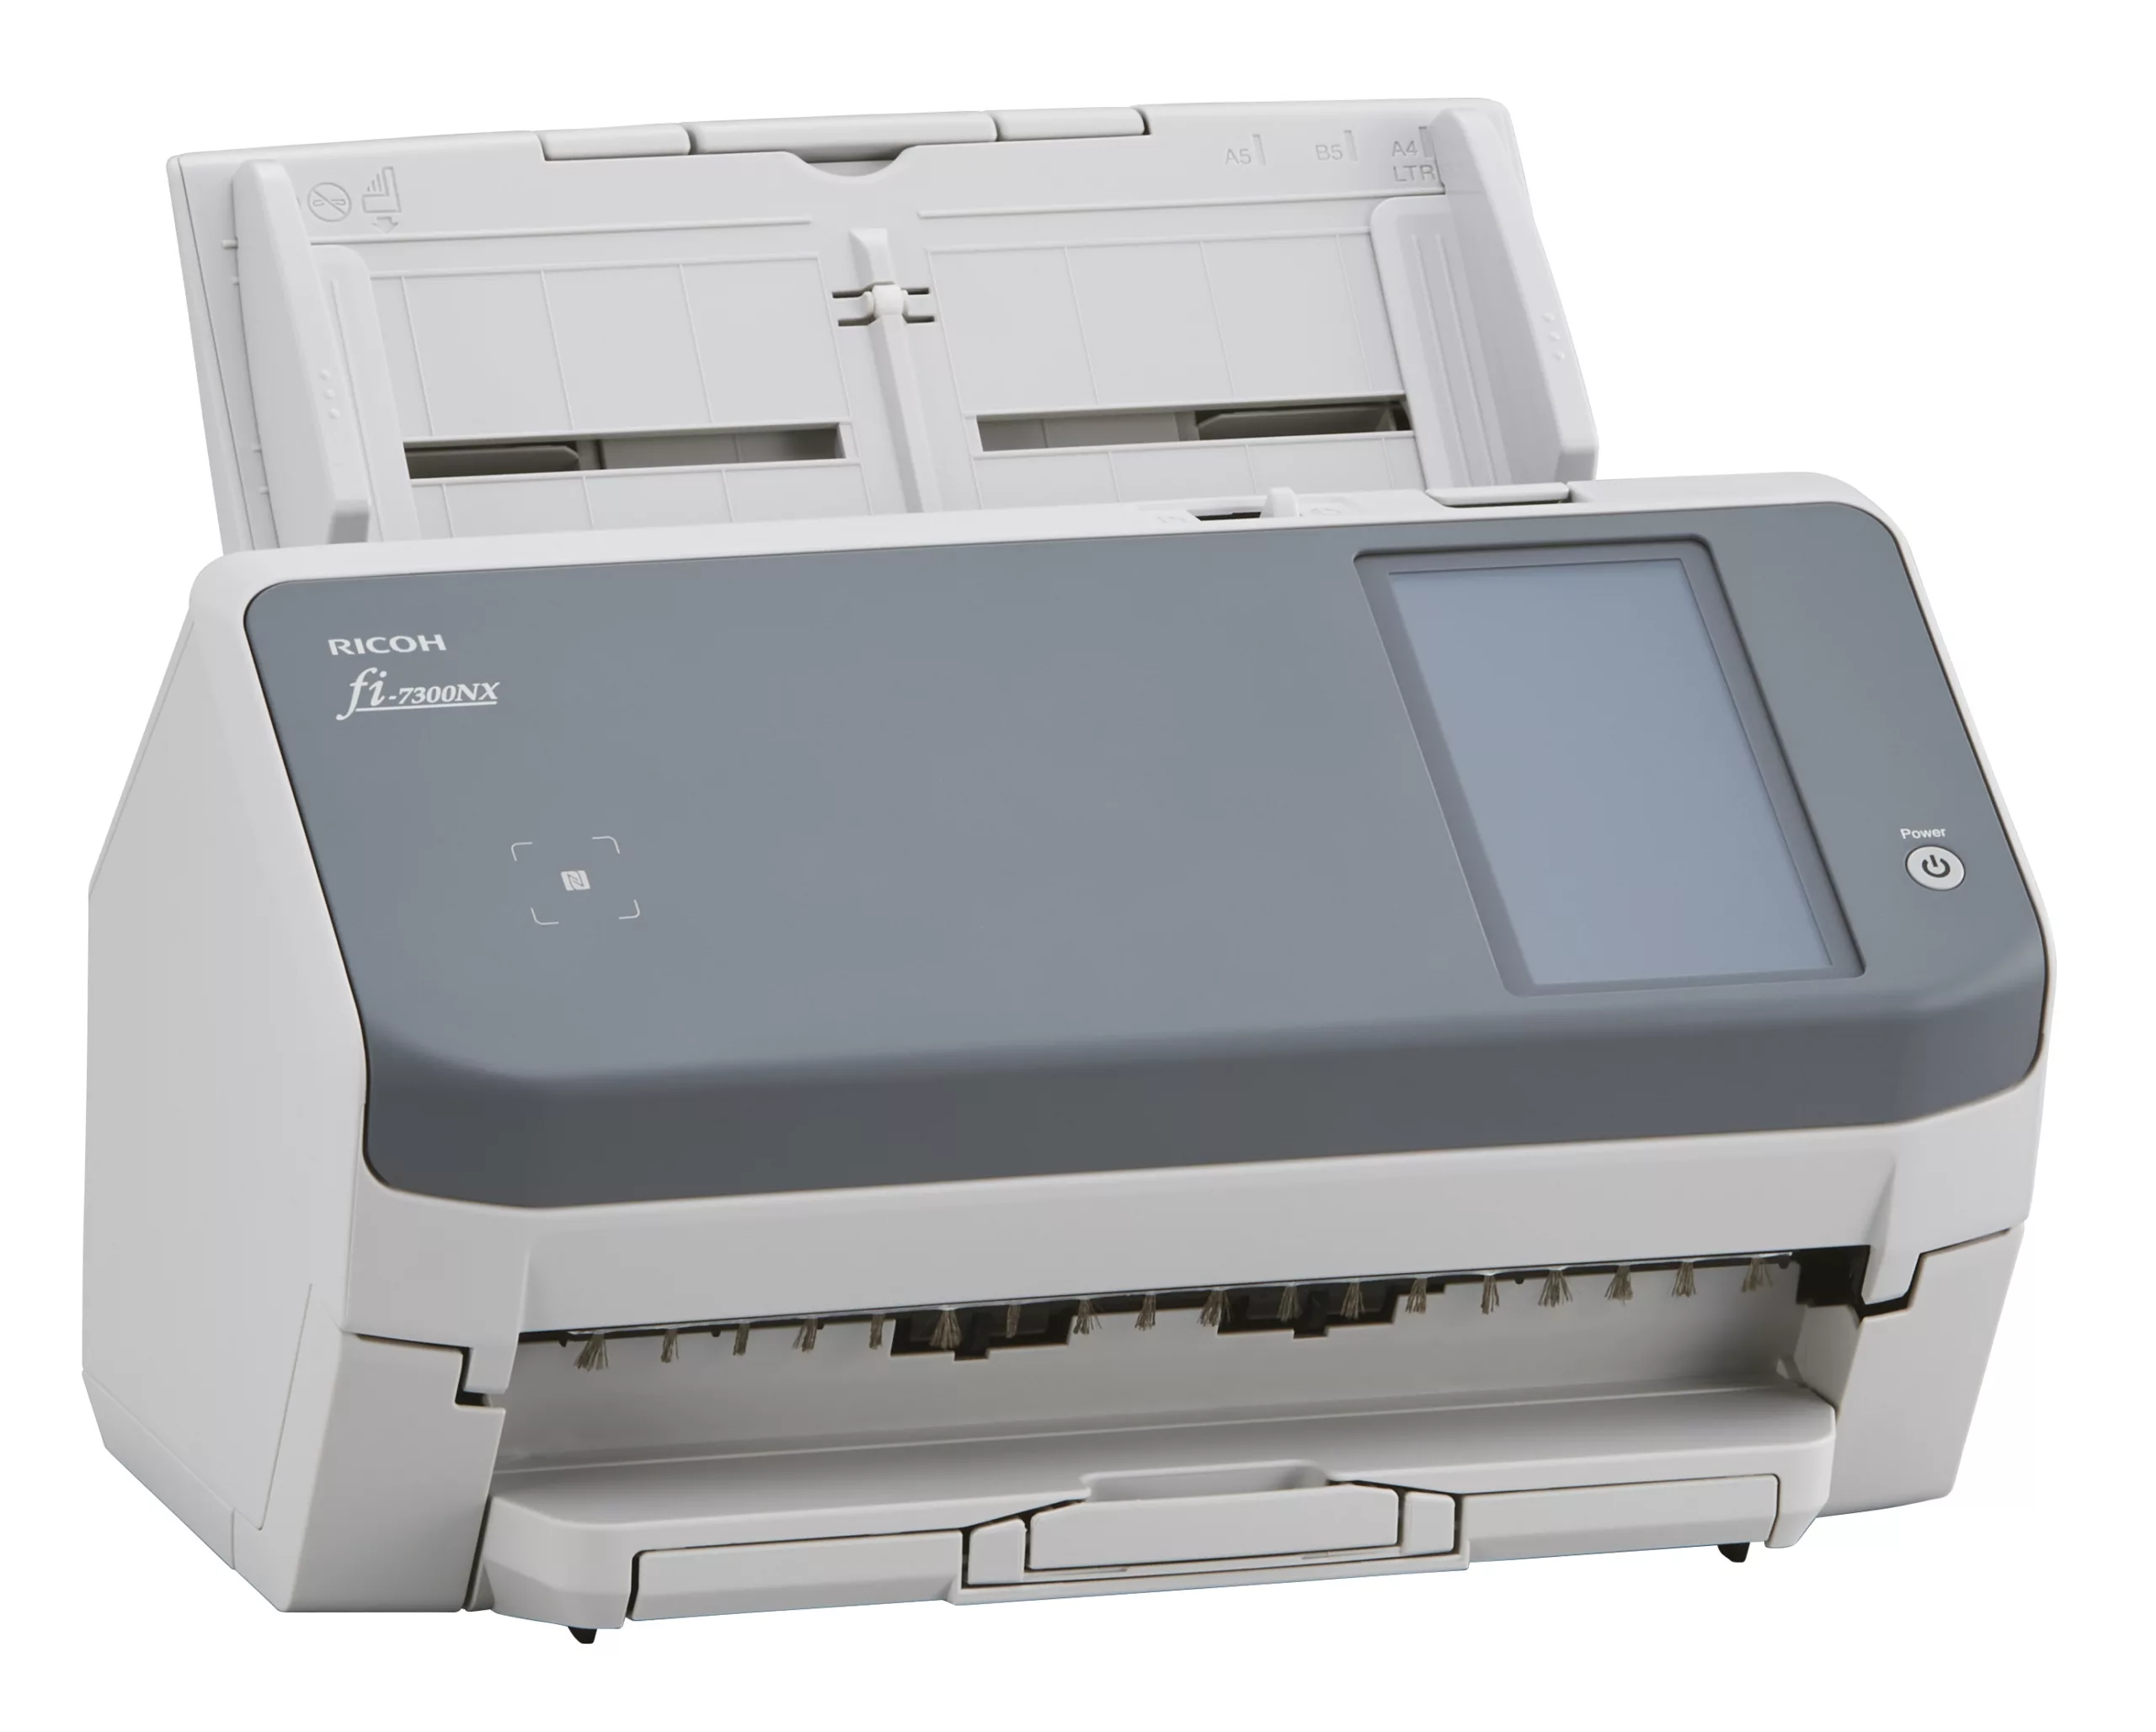 Ricoh fi-7300NX right view of image scanner